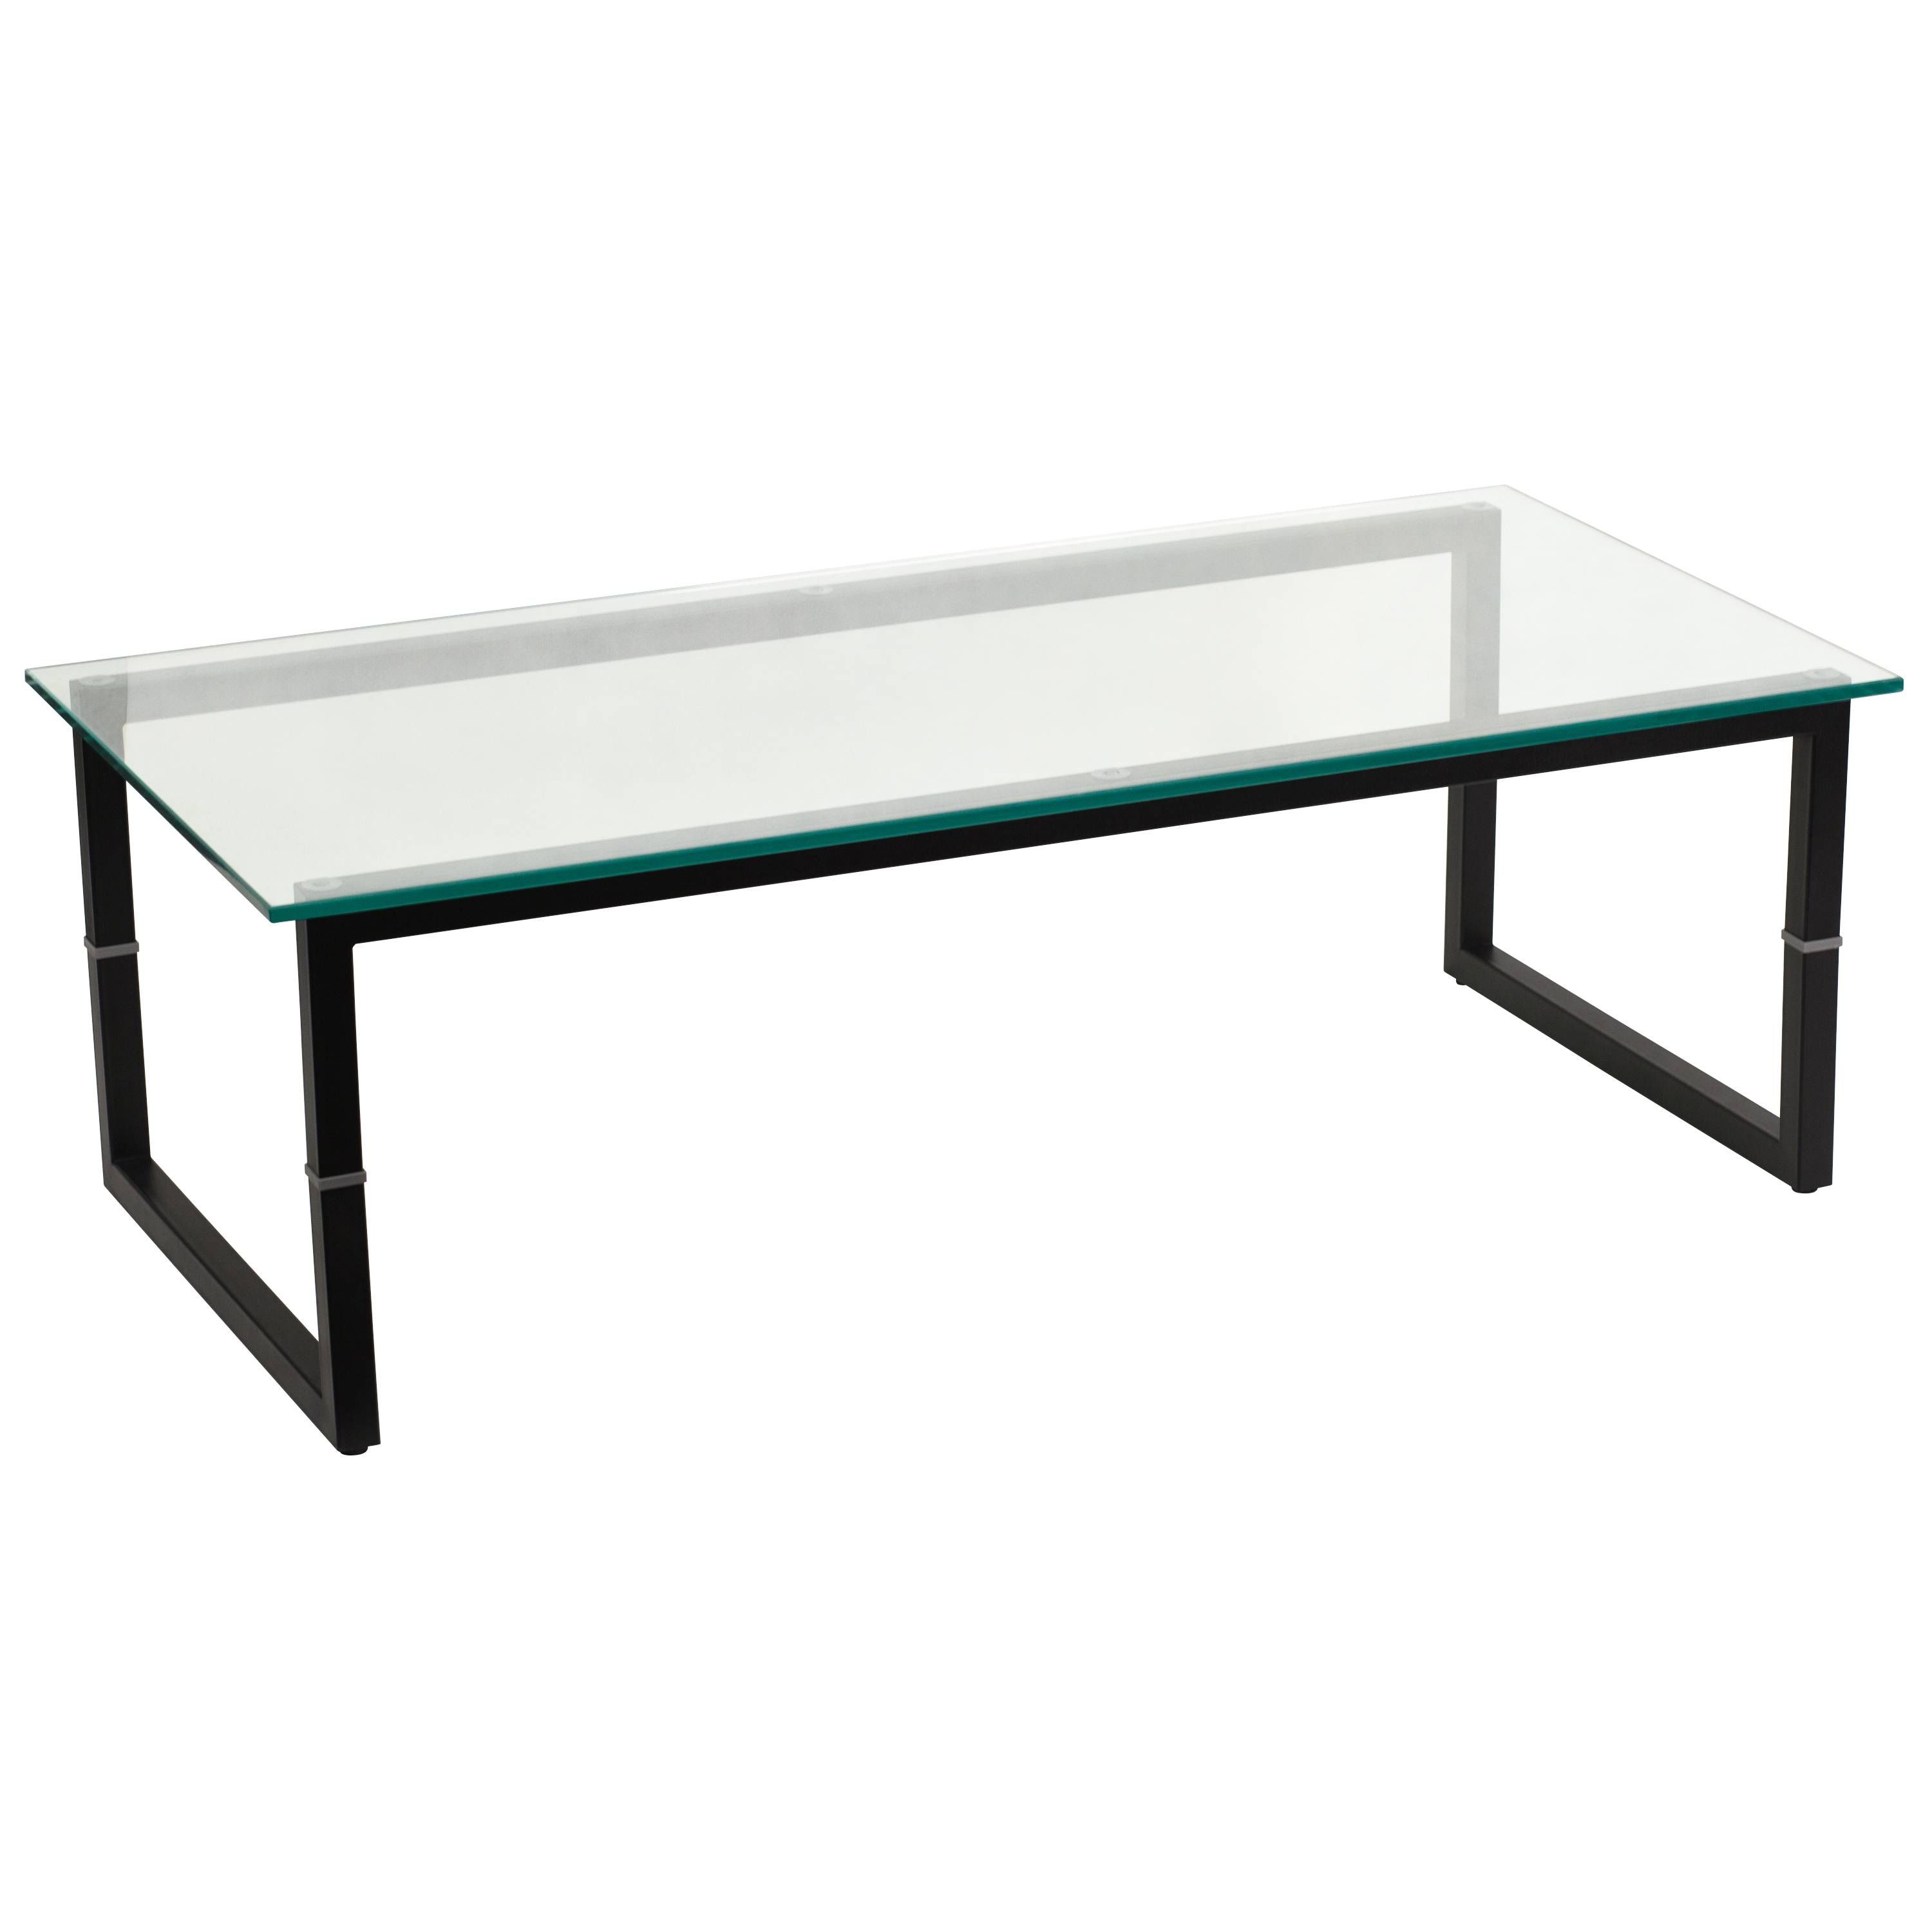 Rectangular Glass Coffee Table | Coffee Tables Decoration With Glass Metal Coffee Tables (View 9 of 30)